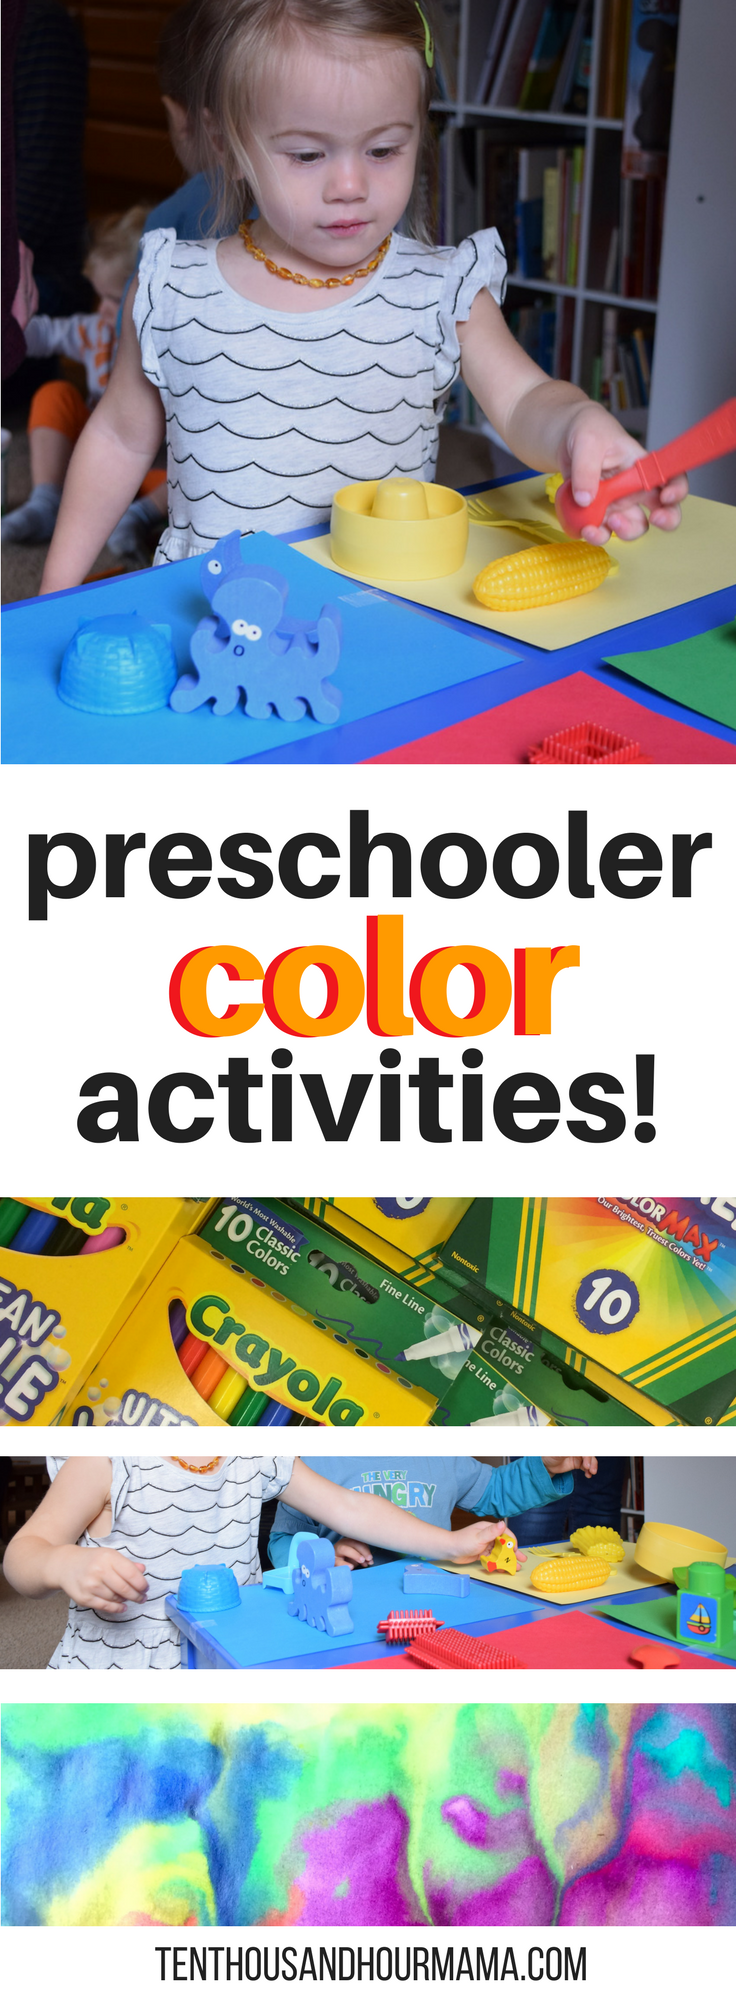 These toddler activities about color, for your homeschool preschool or just a fun project, are a great way for kids to learn about colors—and to have fun! Ten Thousand Hour Mama